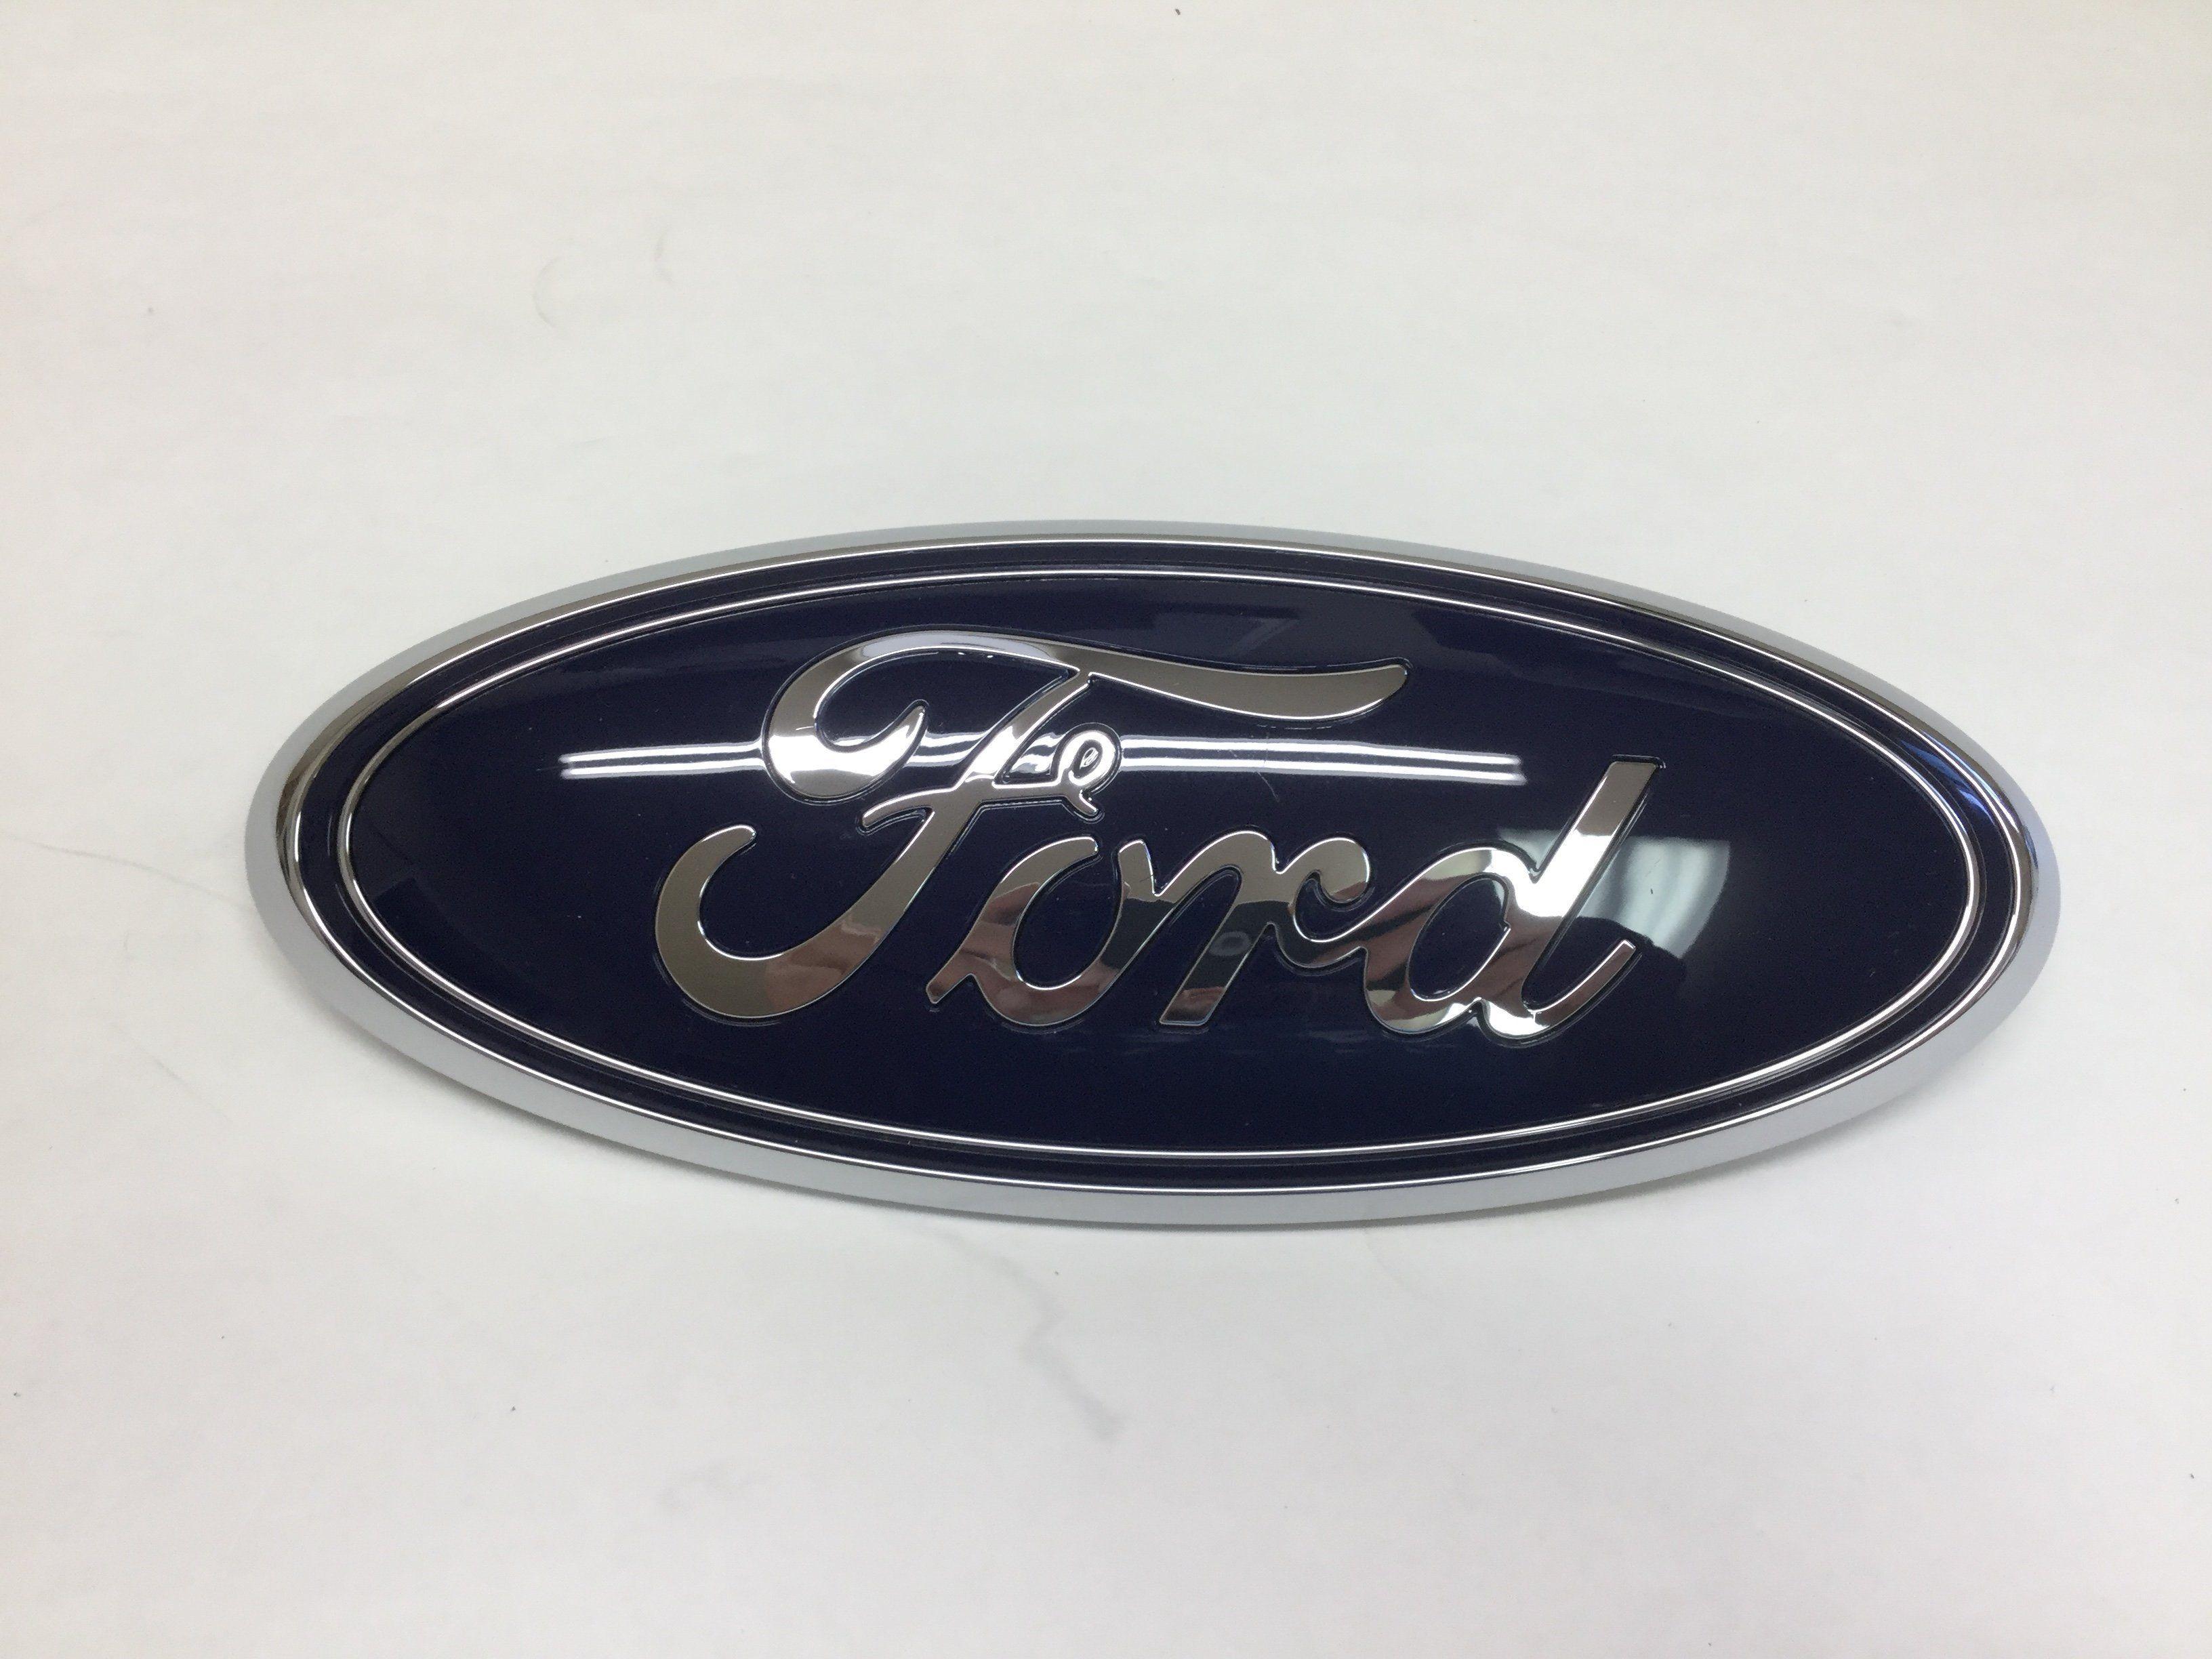 New Ford Motor Logo - New Ford Edge Flex Taurus X Front Grille Chrome or Blue Oval Ford ...